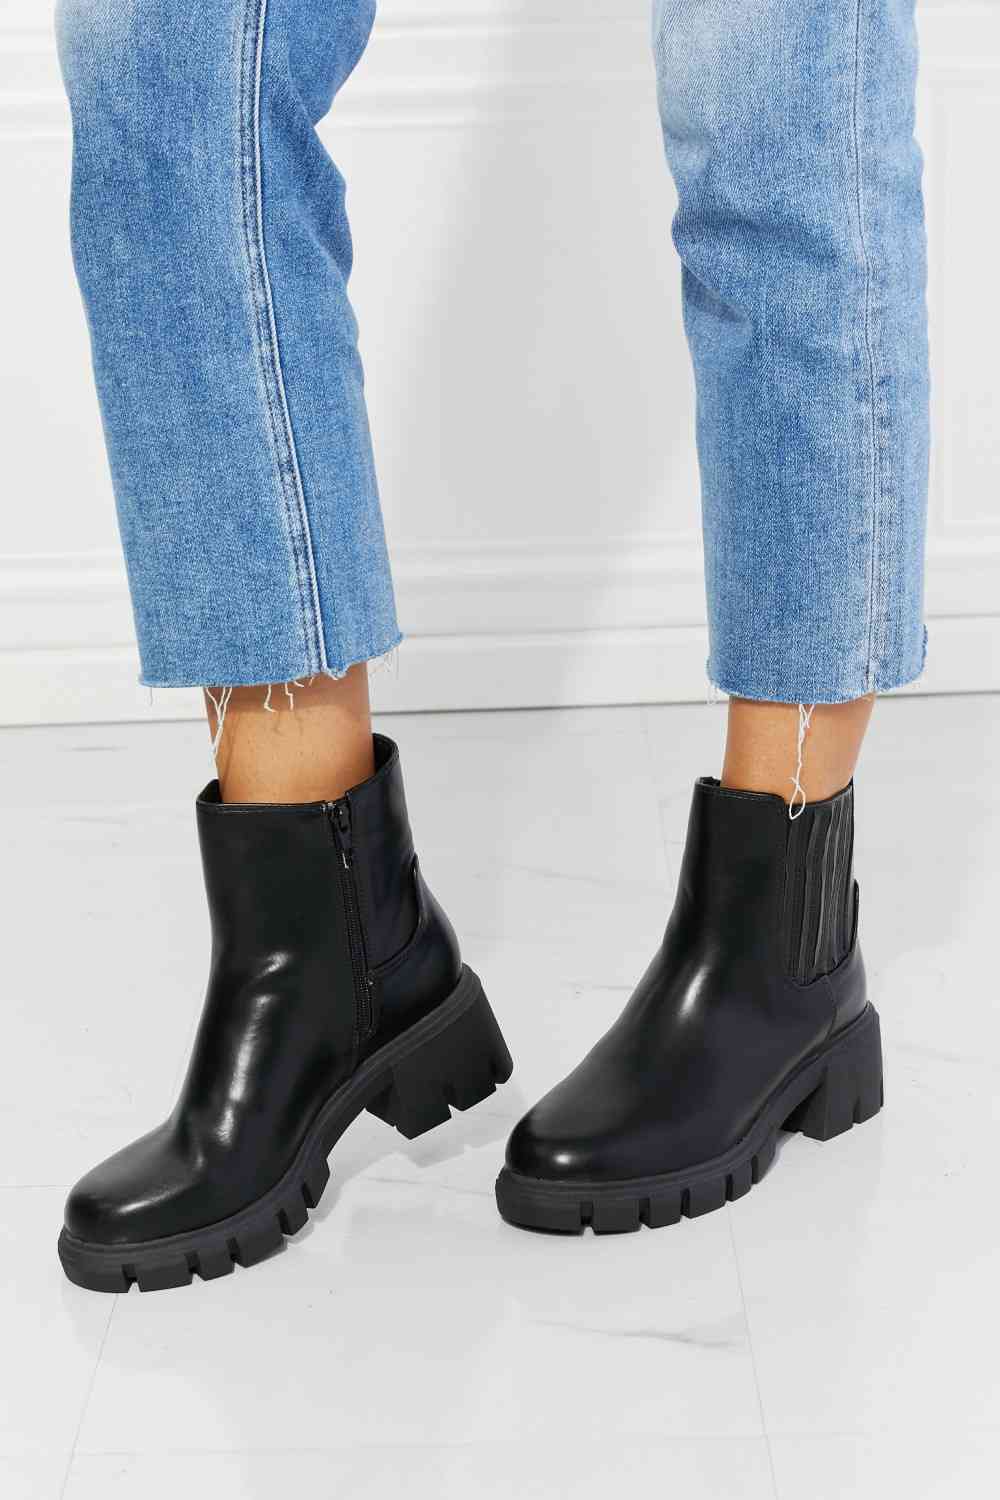 MMShoes What It Takes Lug Sole Chelsea Boots in Black Black